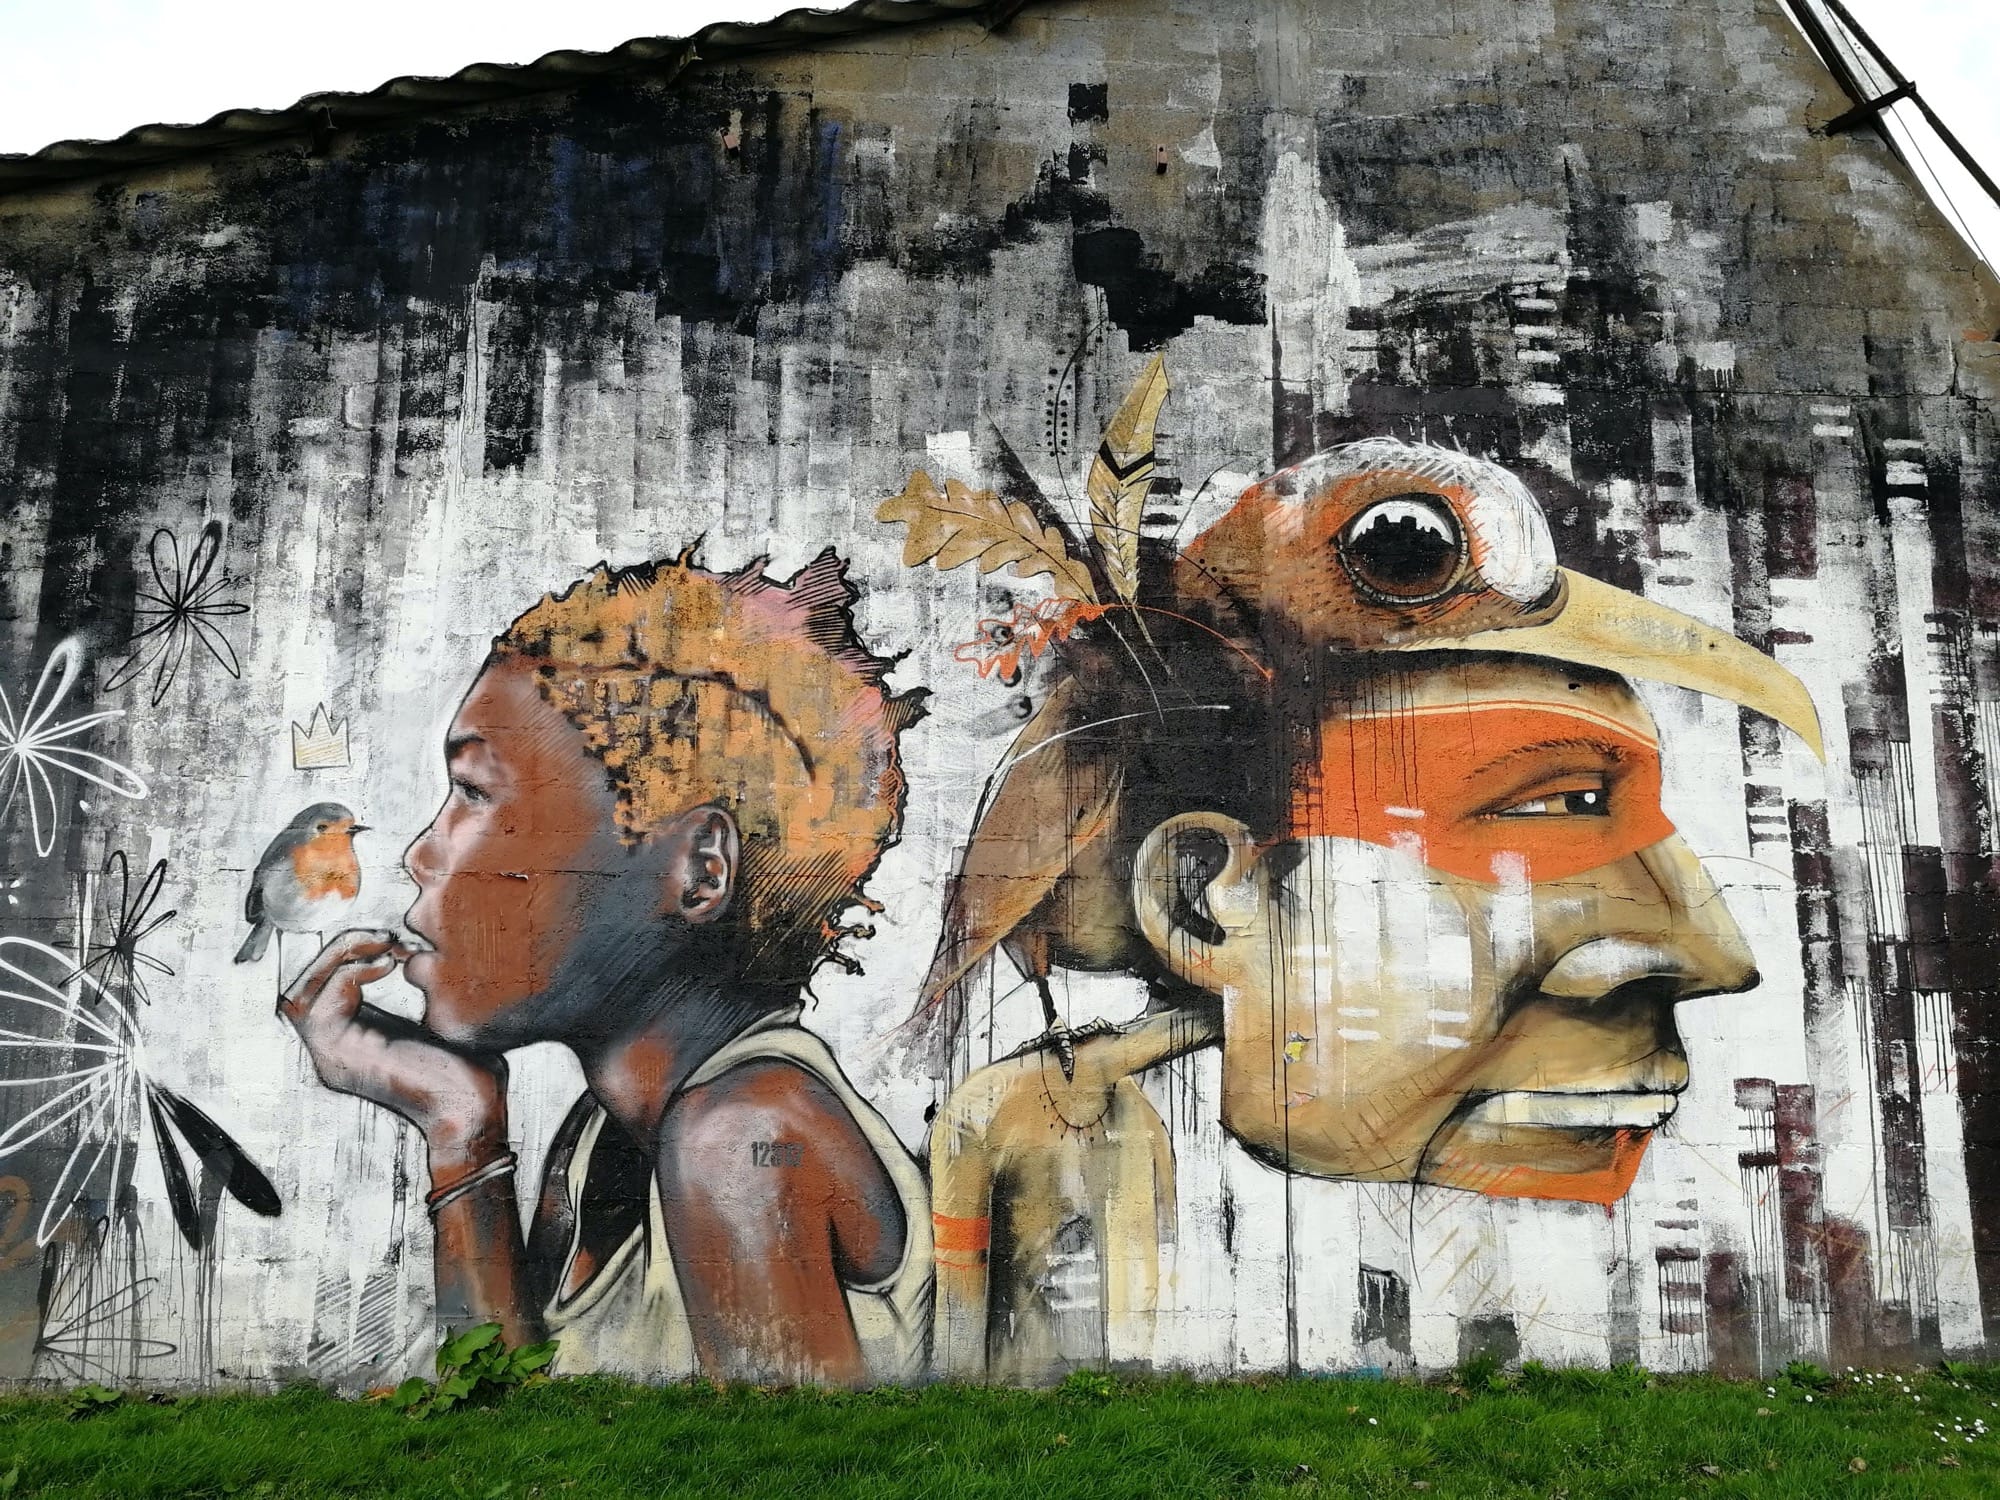 Graffiti 1208  by the artist Mika captured by Rabot in Redon France